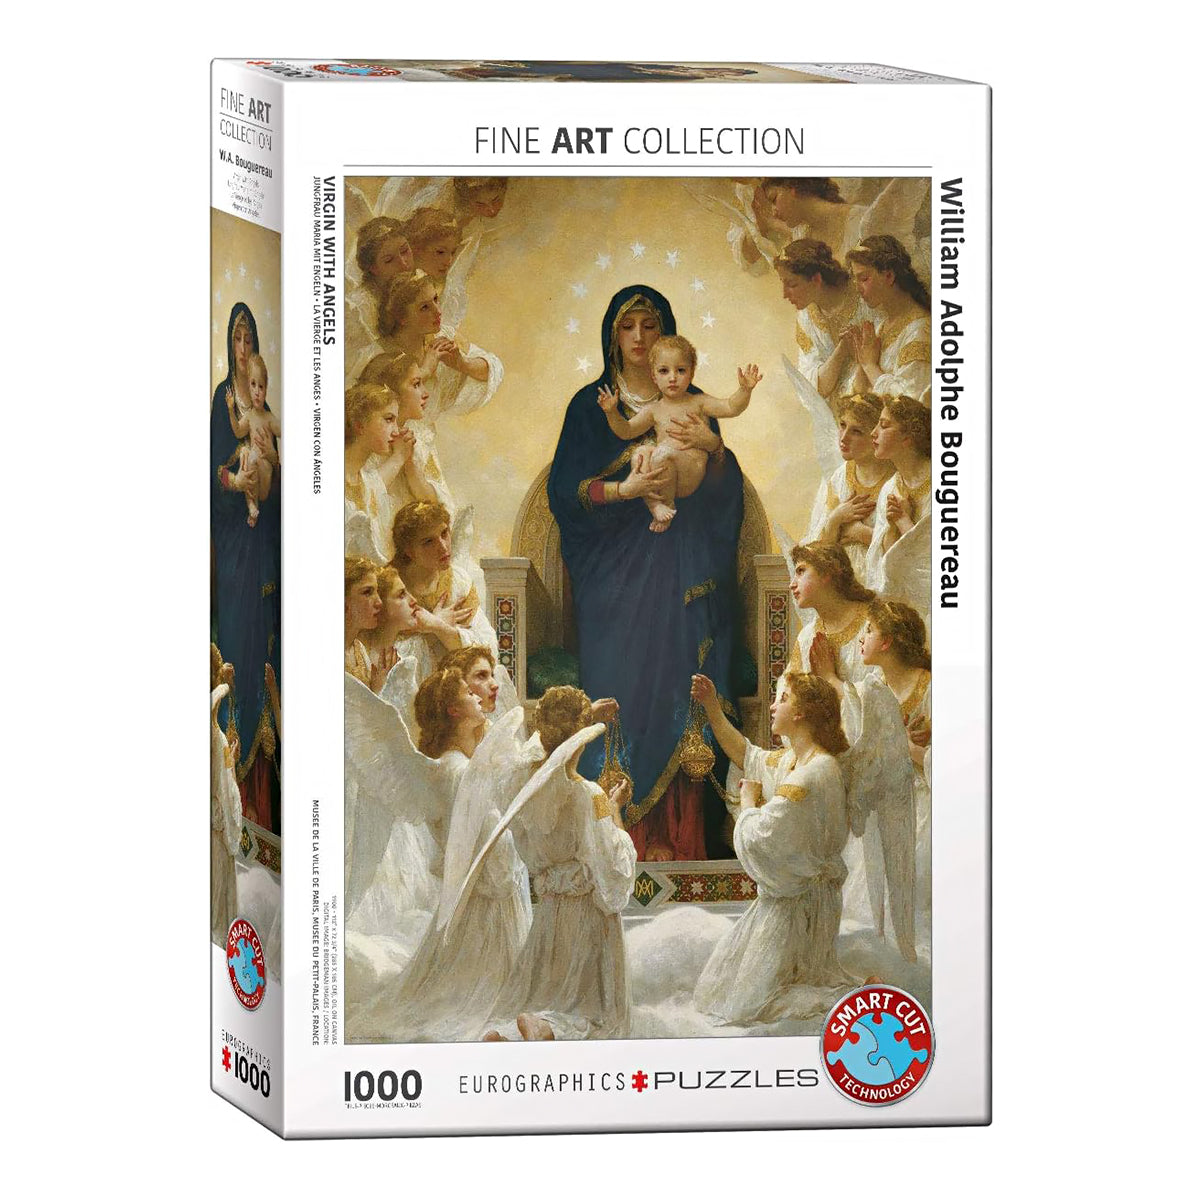 Elevate your wall art collection with this 1000-piece Bouguereau jigsaw puzzle from Eurographics